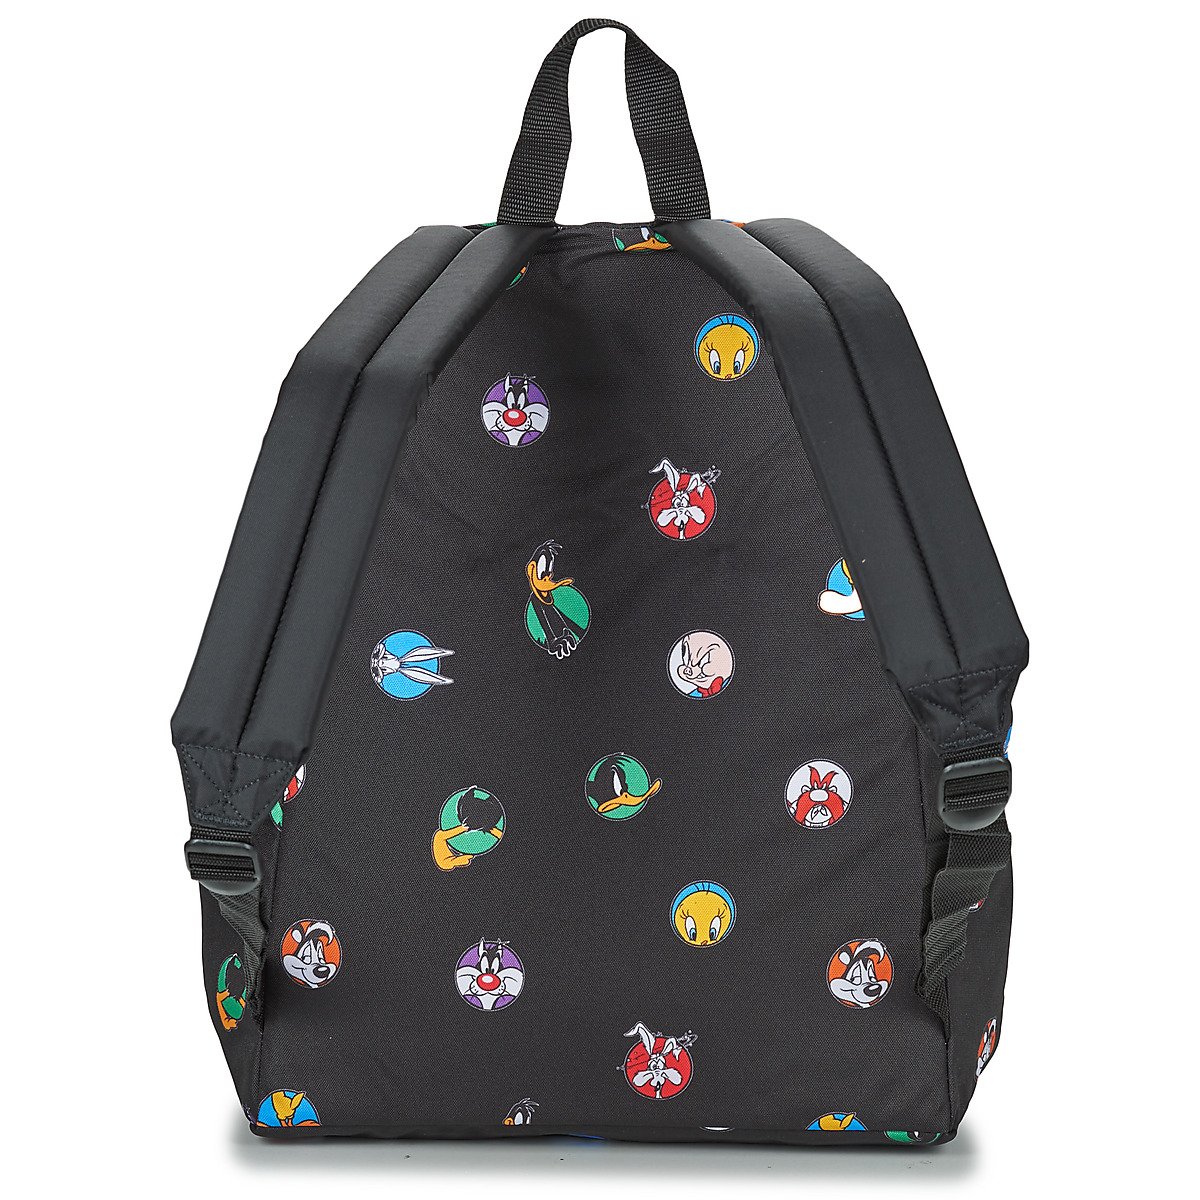 Backpack PADDED PAK'R LOONEY TUNES 24L